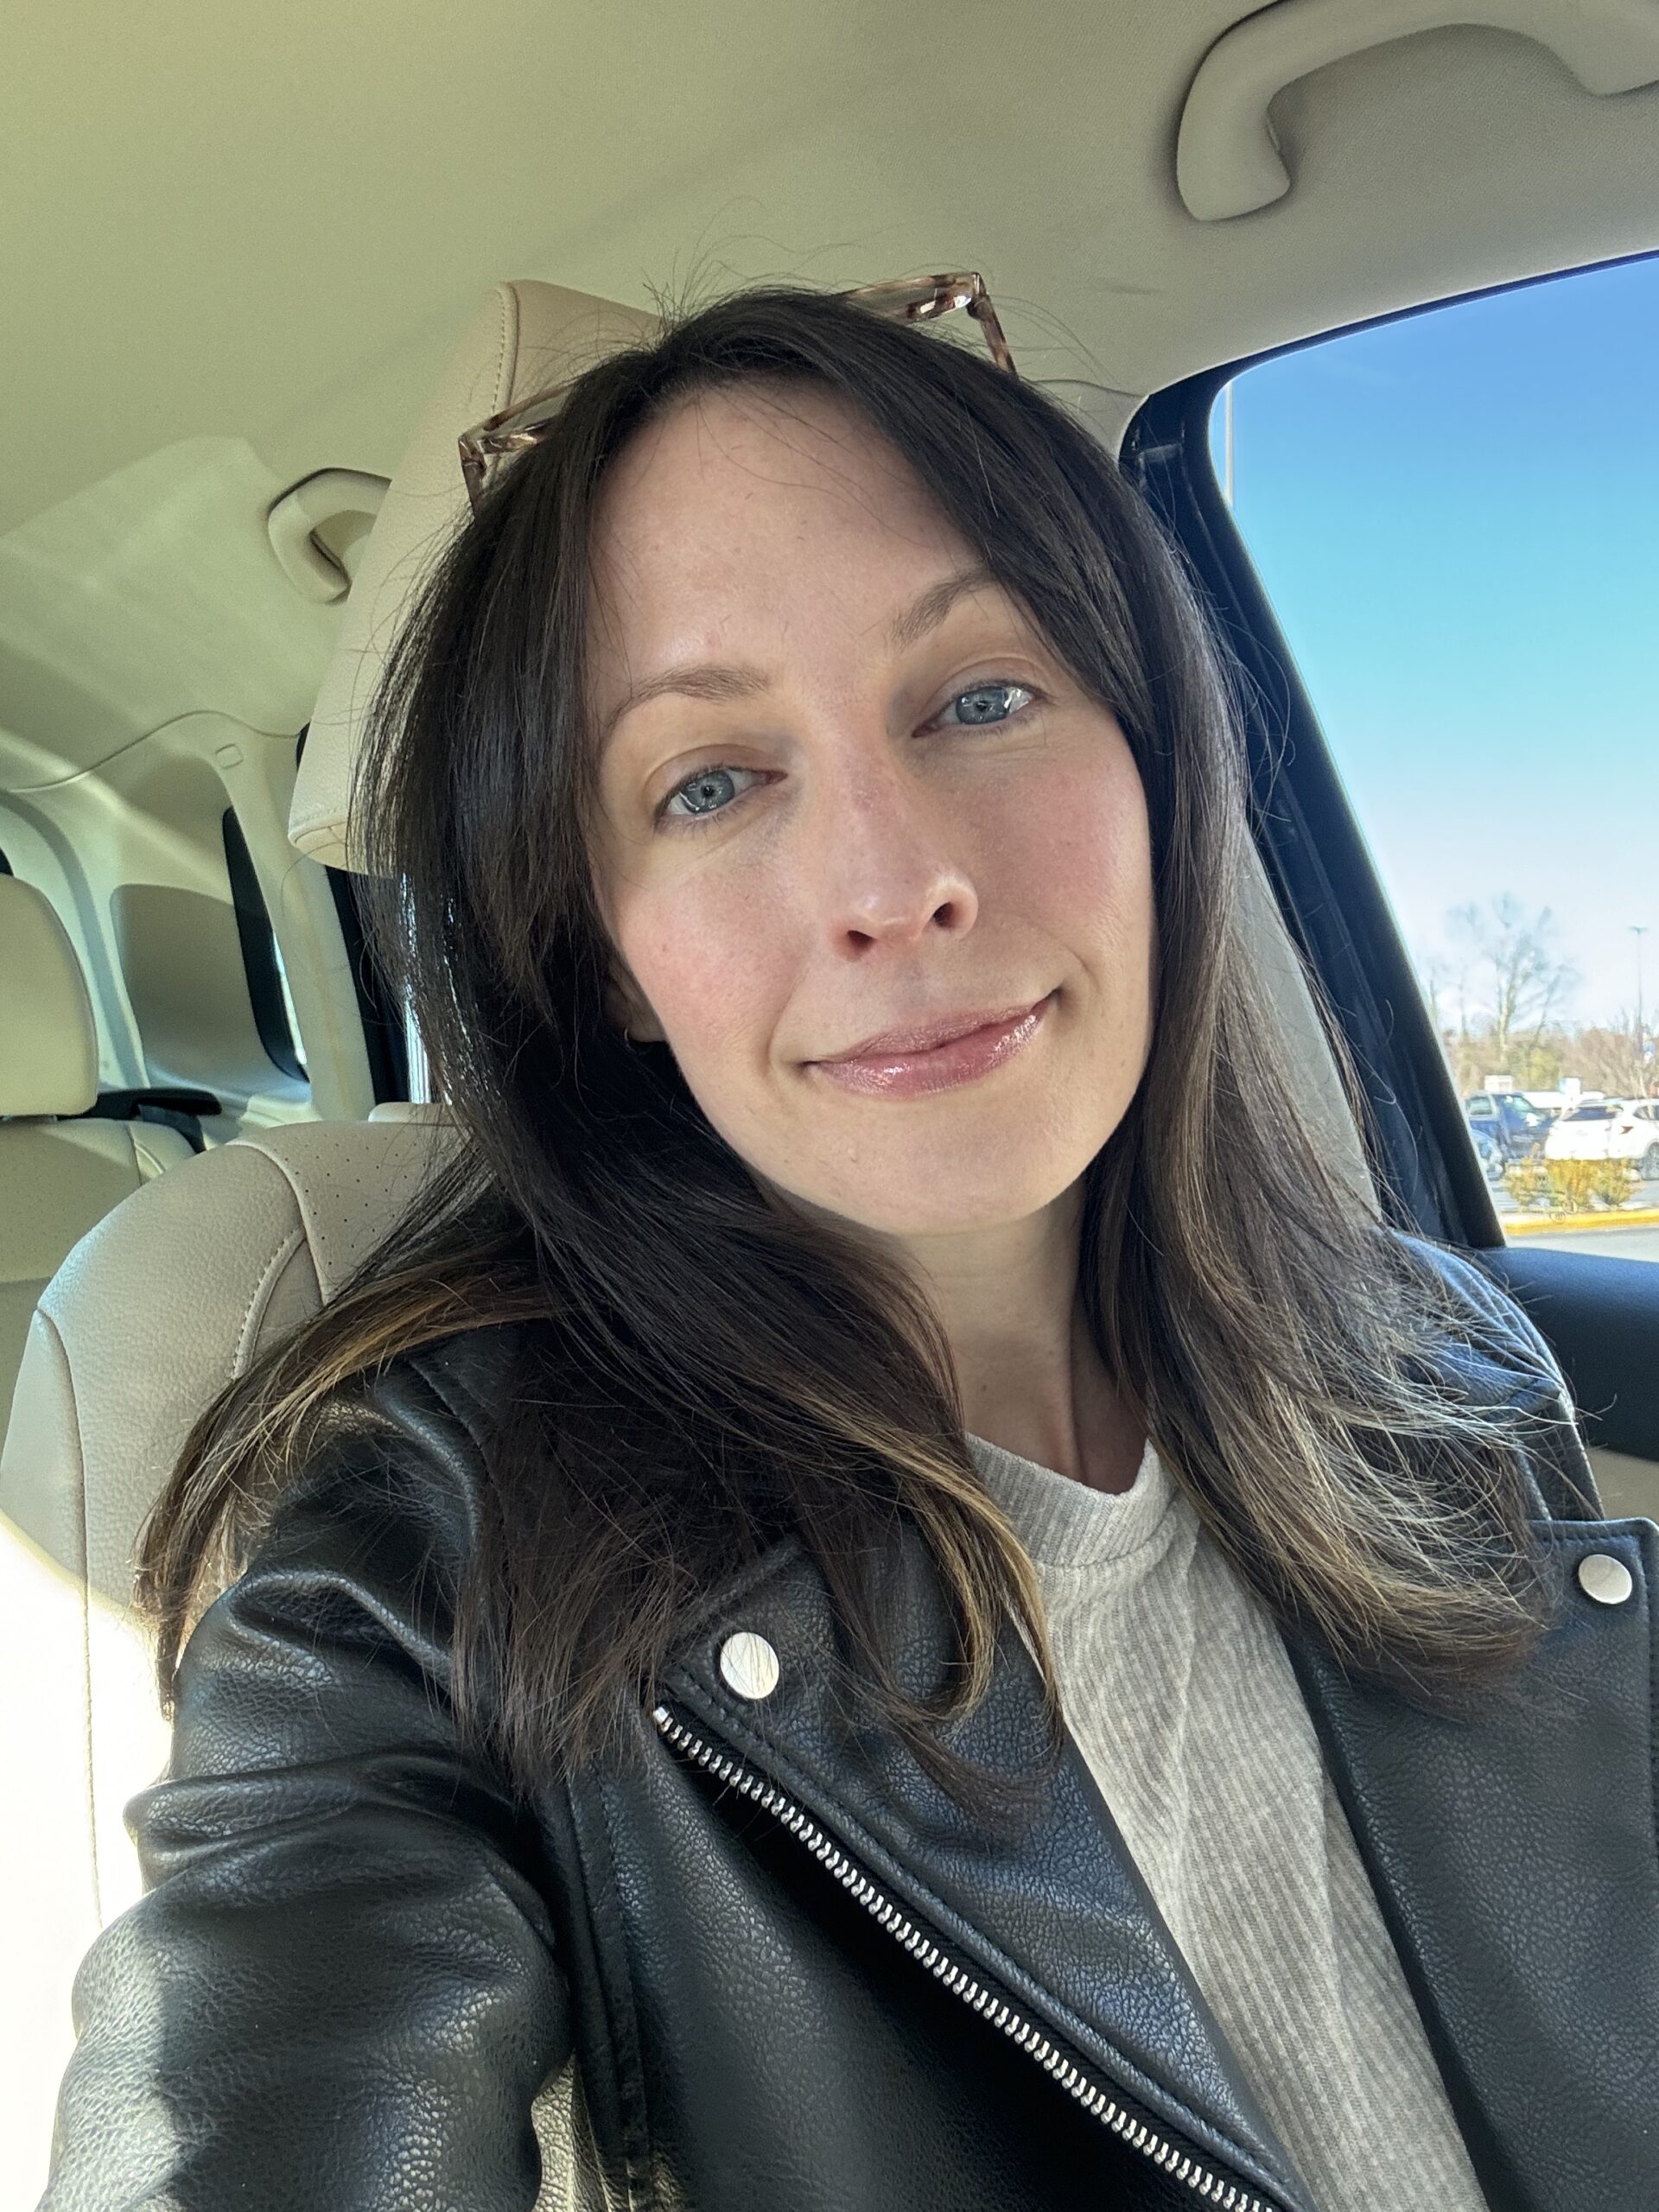 A woman with medium-length brown hair and blue eyes, wearing a white top and black leather jacket, smiling subtly in a car.